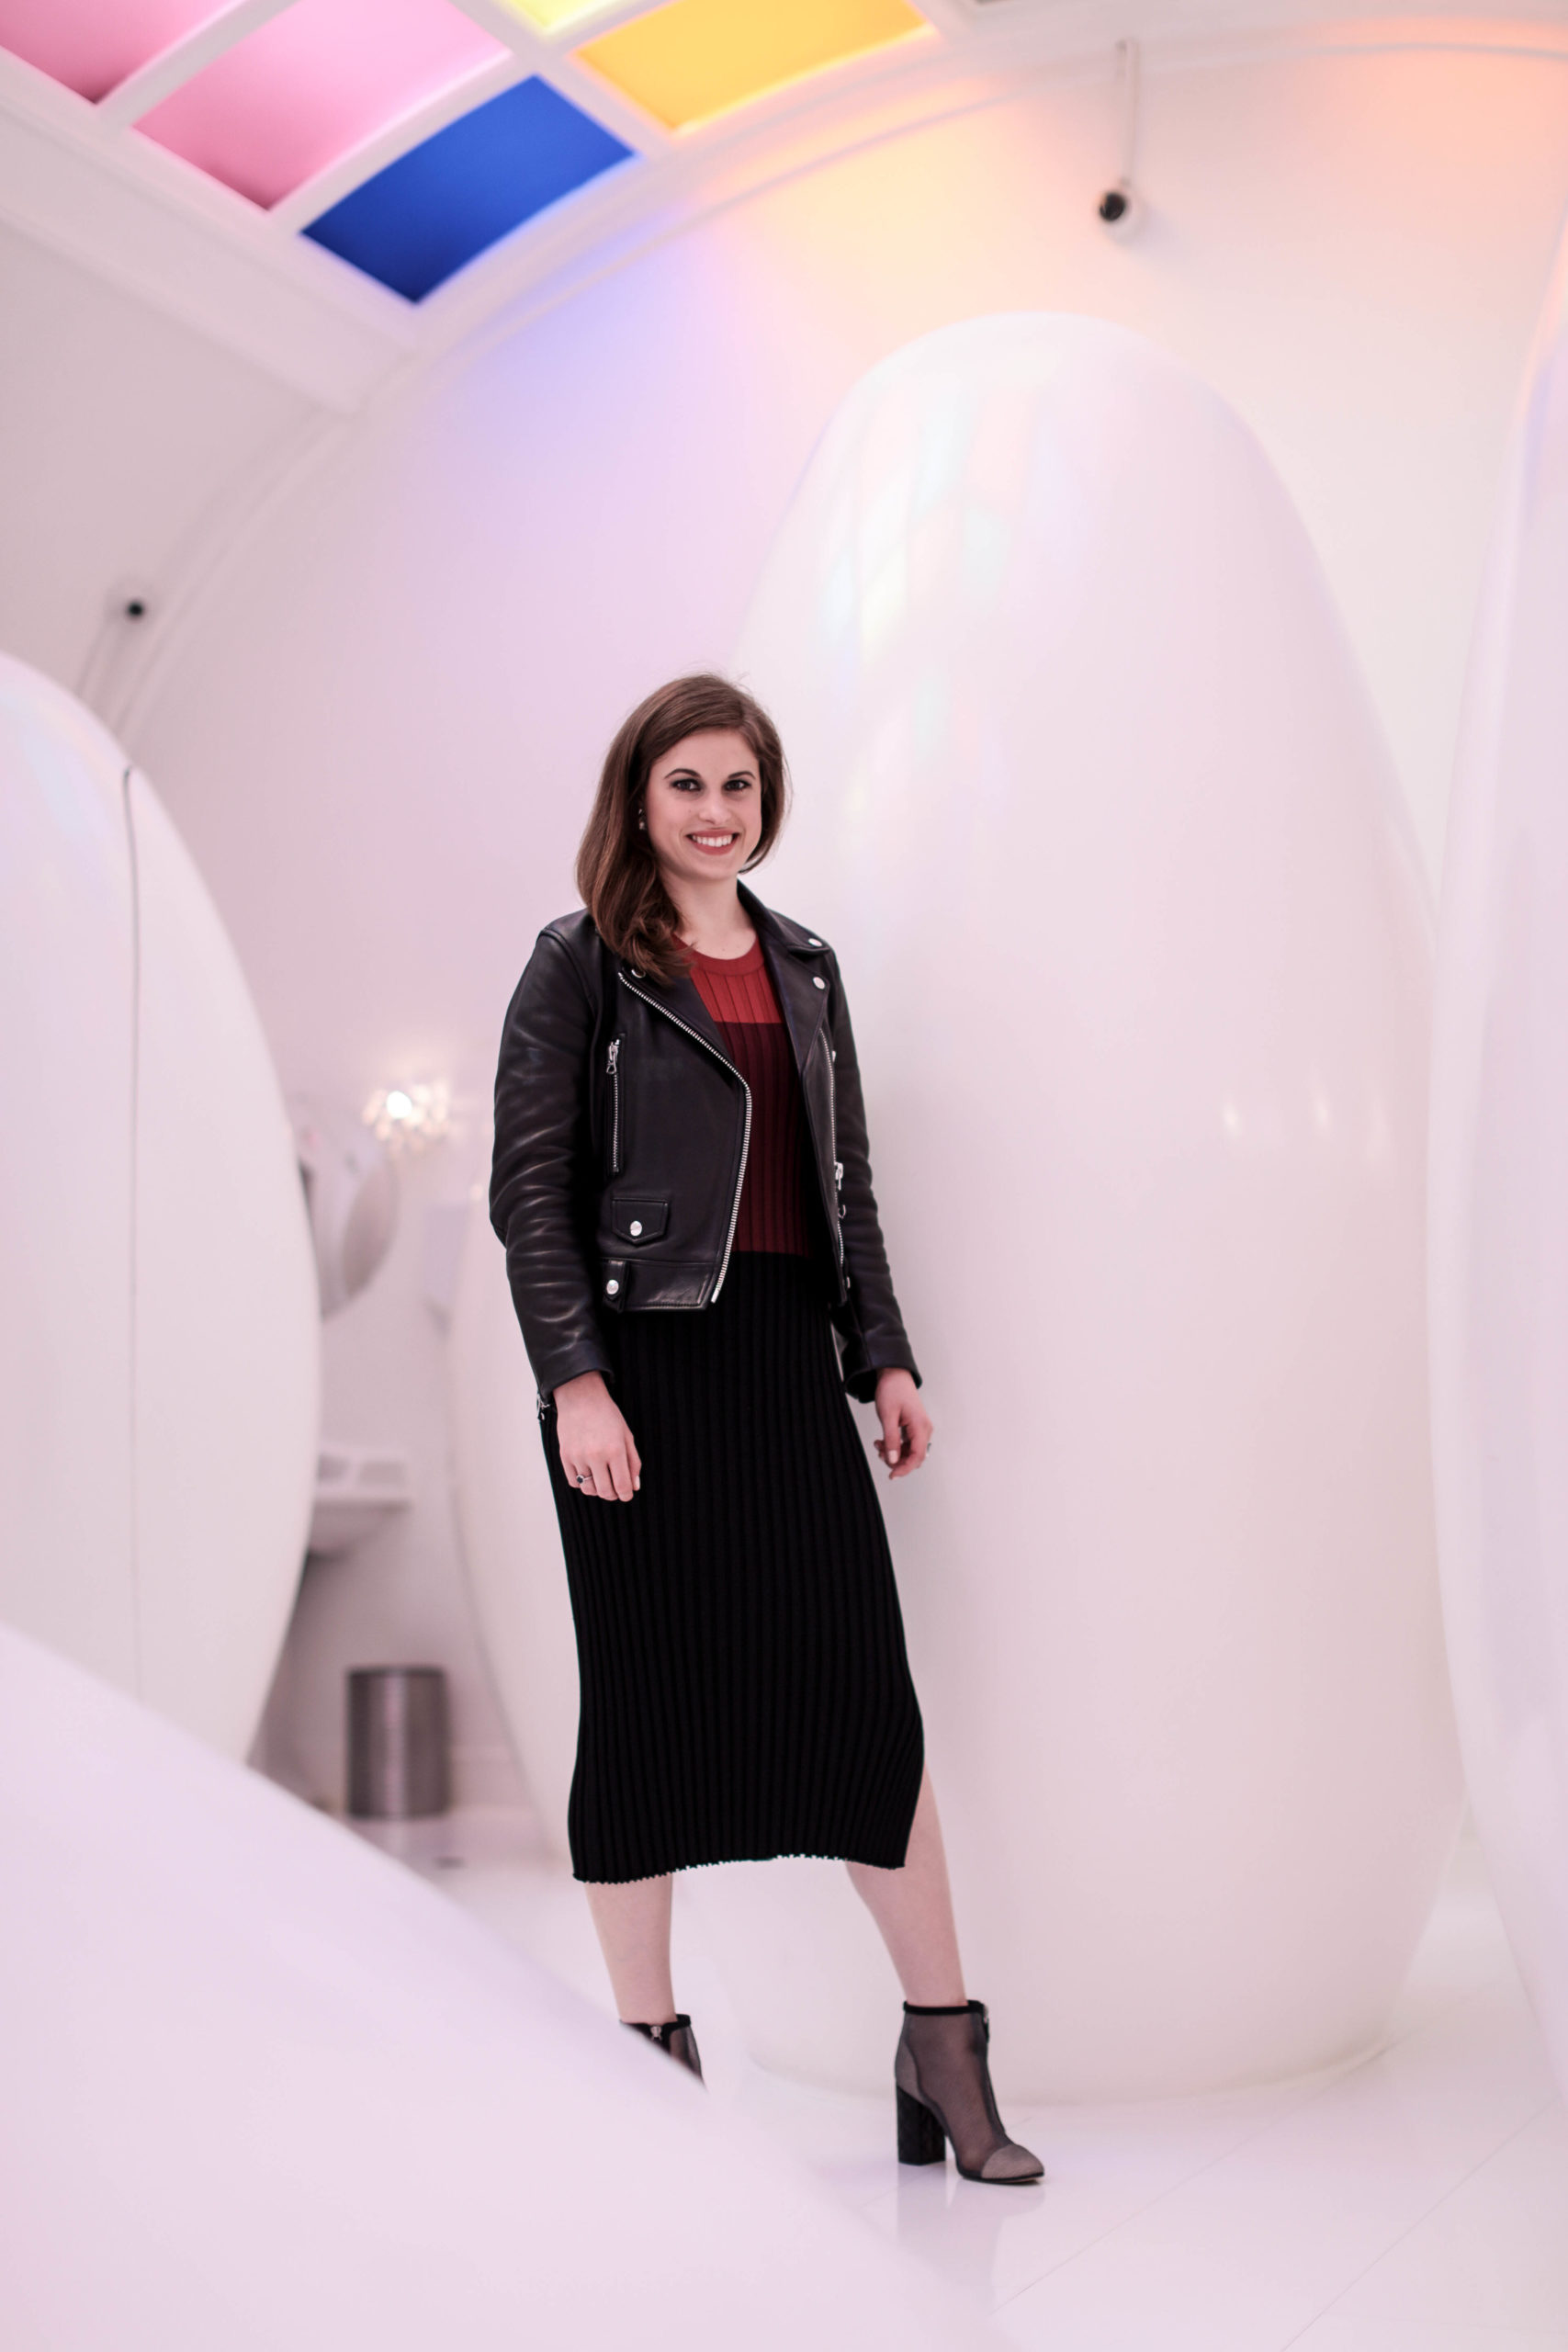 Woman standing in the bathroom at sketch in London in front of the egg-shaped sculptures: she has brown hair, wears a black leather jacket, a black & red striped dress and botties